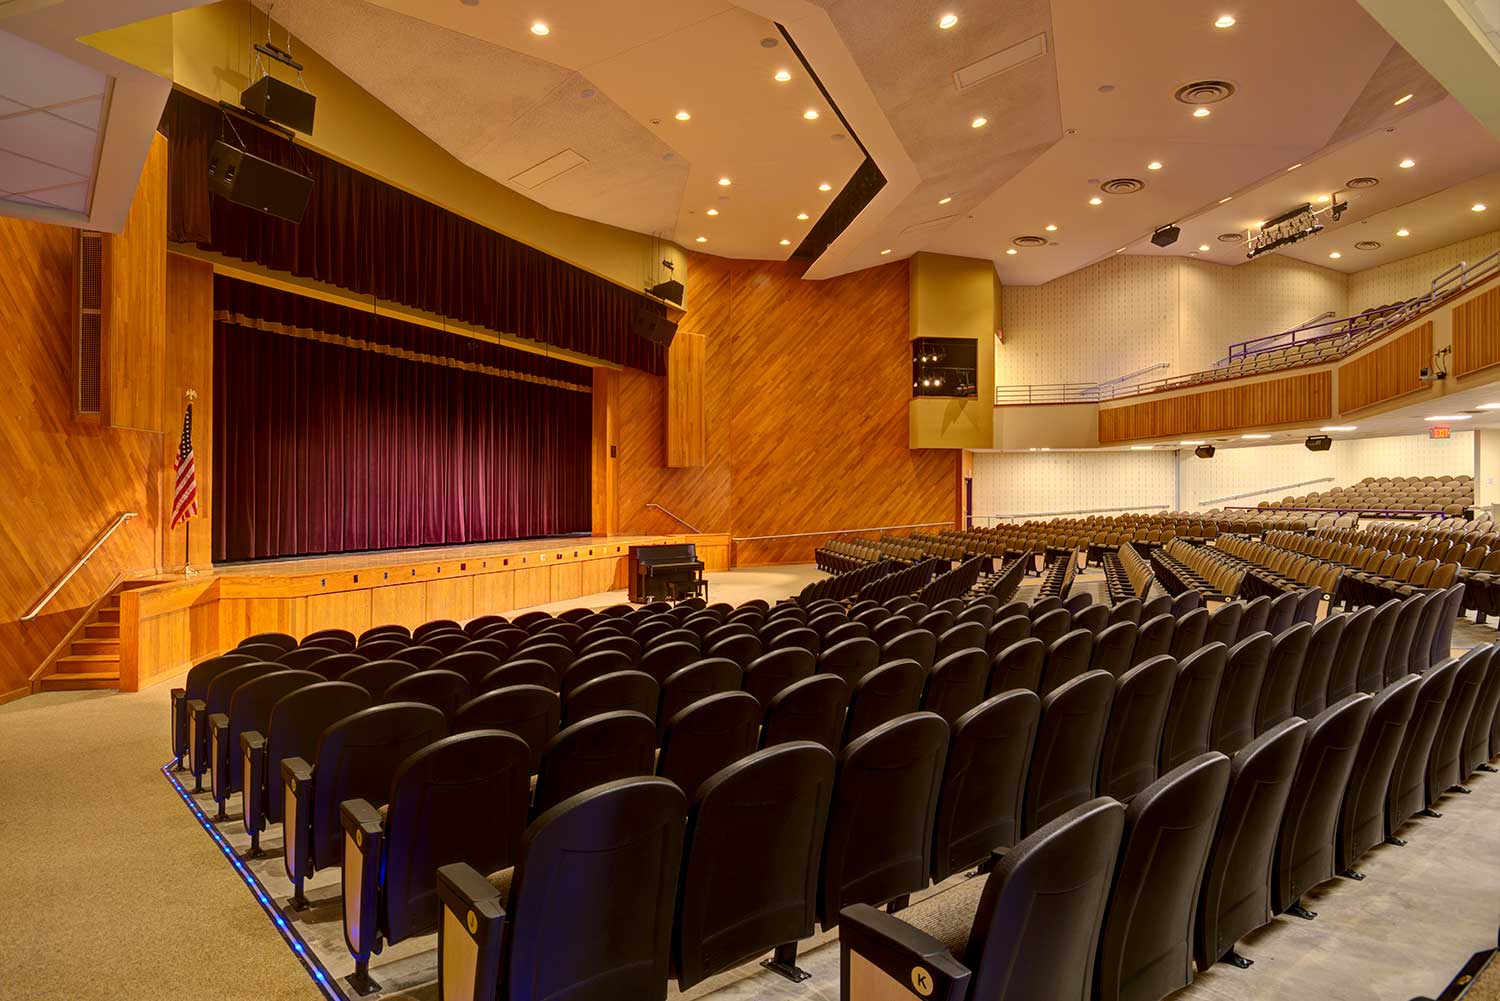 Mosaic's design for the Troy, NY, Middle school music wing and auditorium included an extensive theatrical, lighting and audio-visual installation.